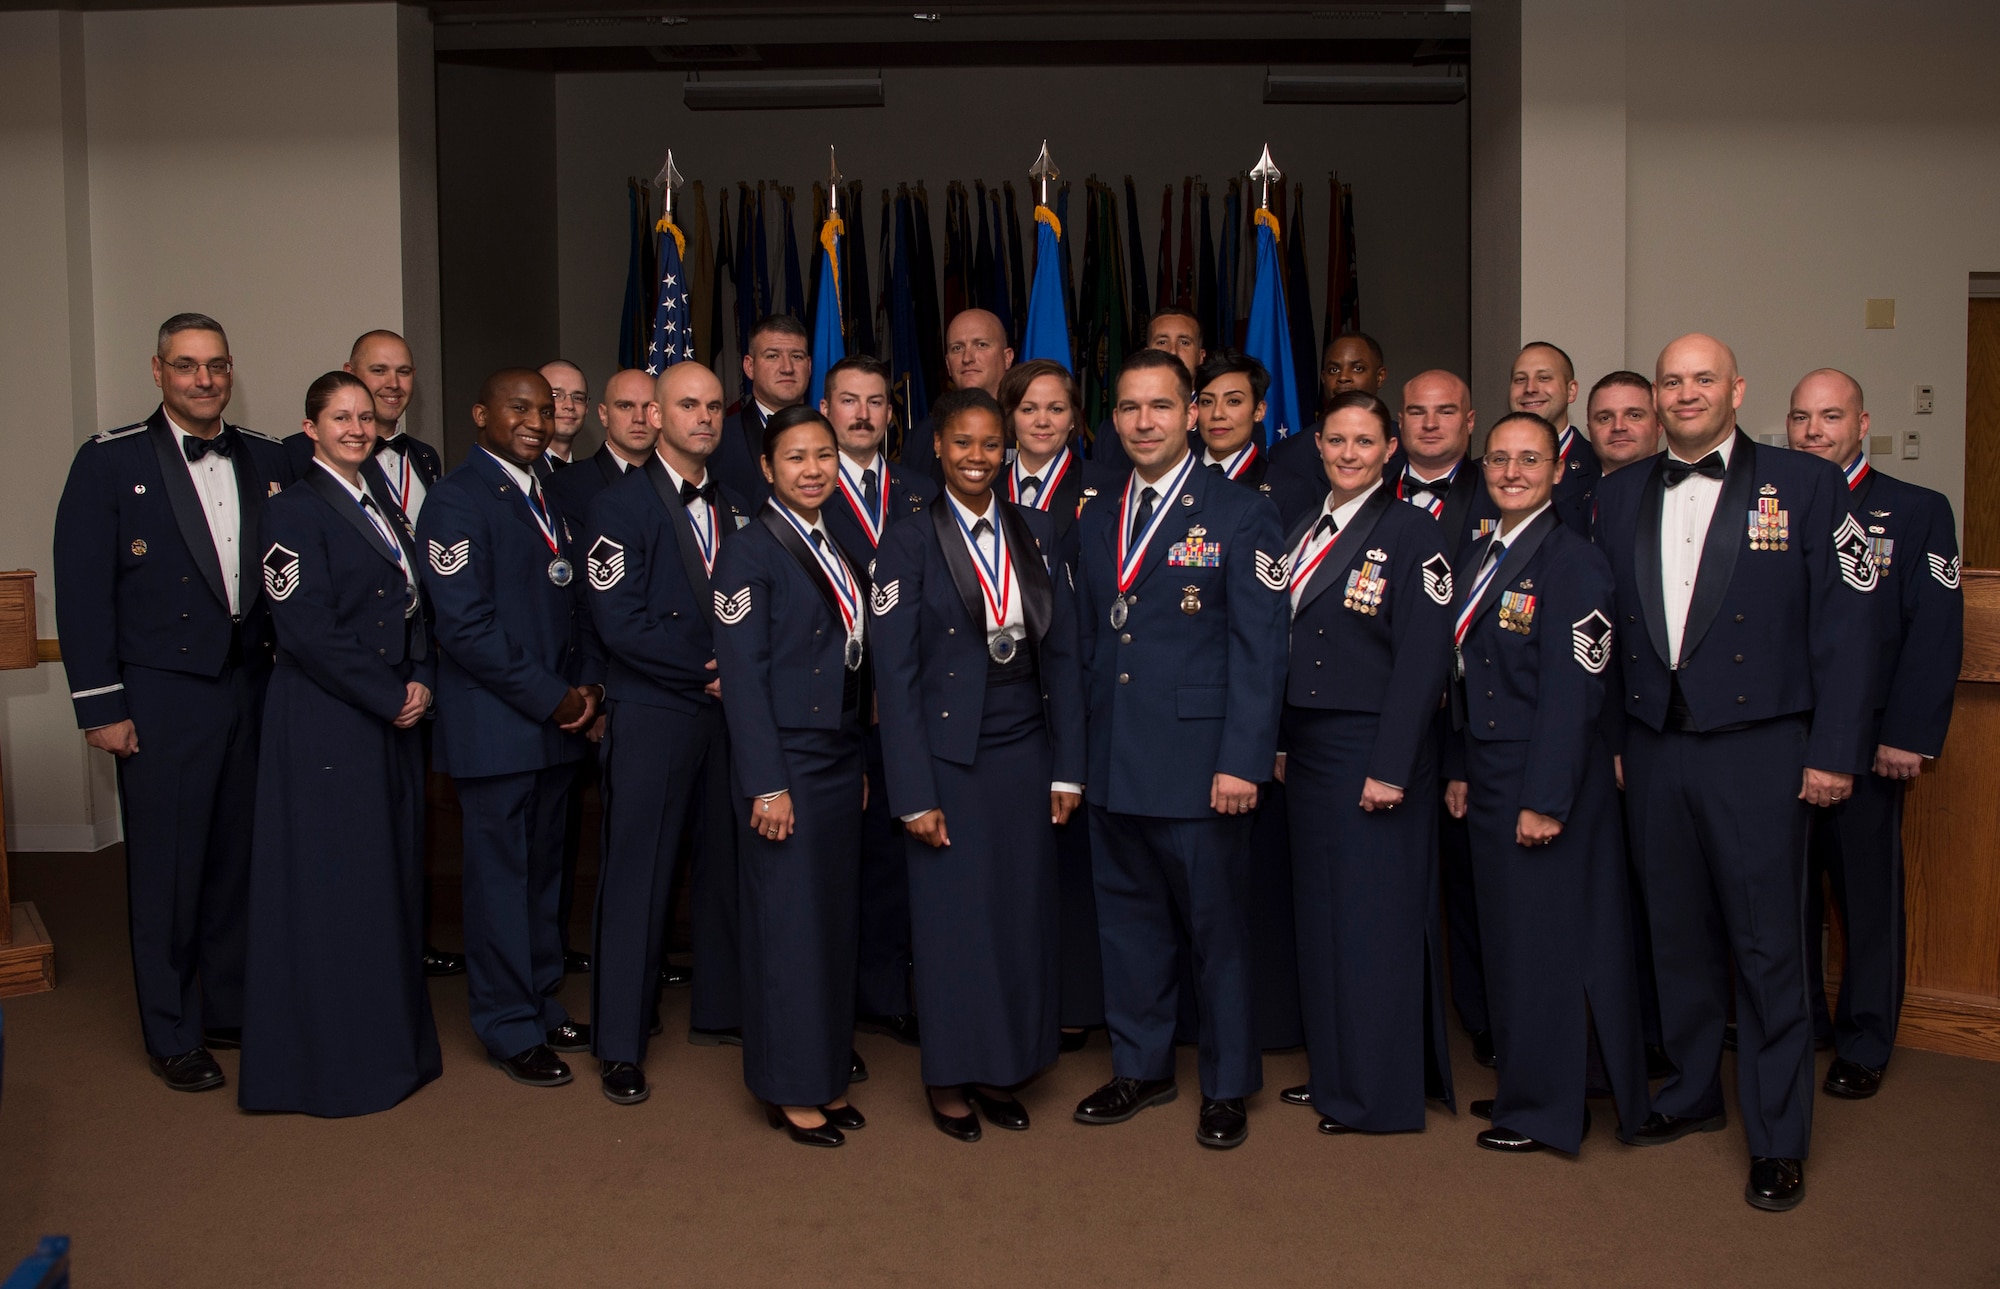 Senior NCO inductees pose for a group photo during a senior NCO induction ceremony at F.E. Warren Air Force Base, Wyo., Sept. 23, 2016. The induction ceremony recognized enlisted Airmen from the base who earned their promotion into the senior NCO tier. (U.S. Air Force photo by Staff Sgt. Christopher Ruano)